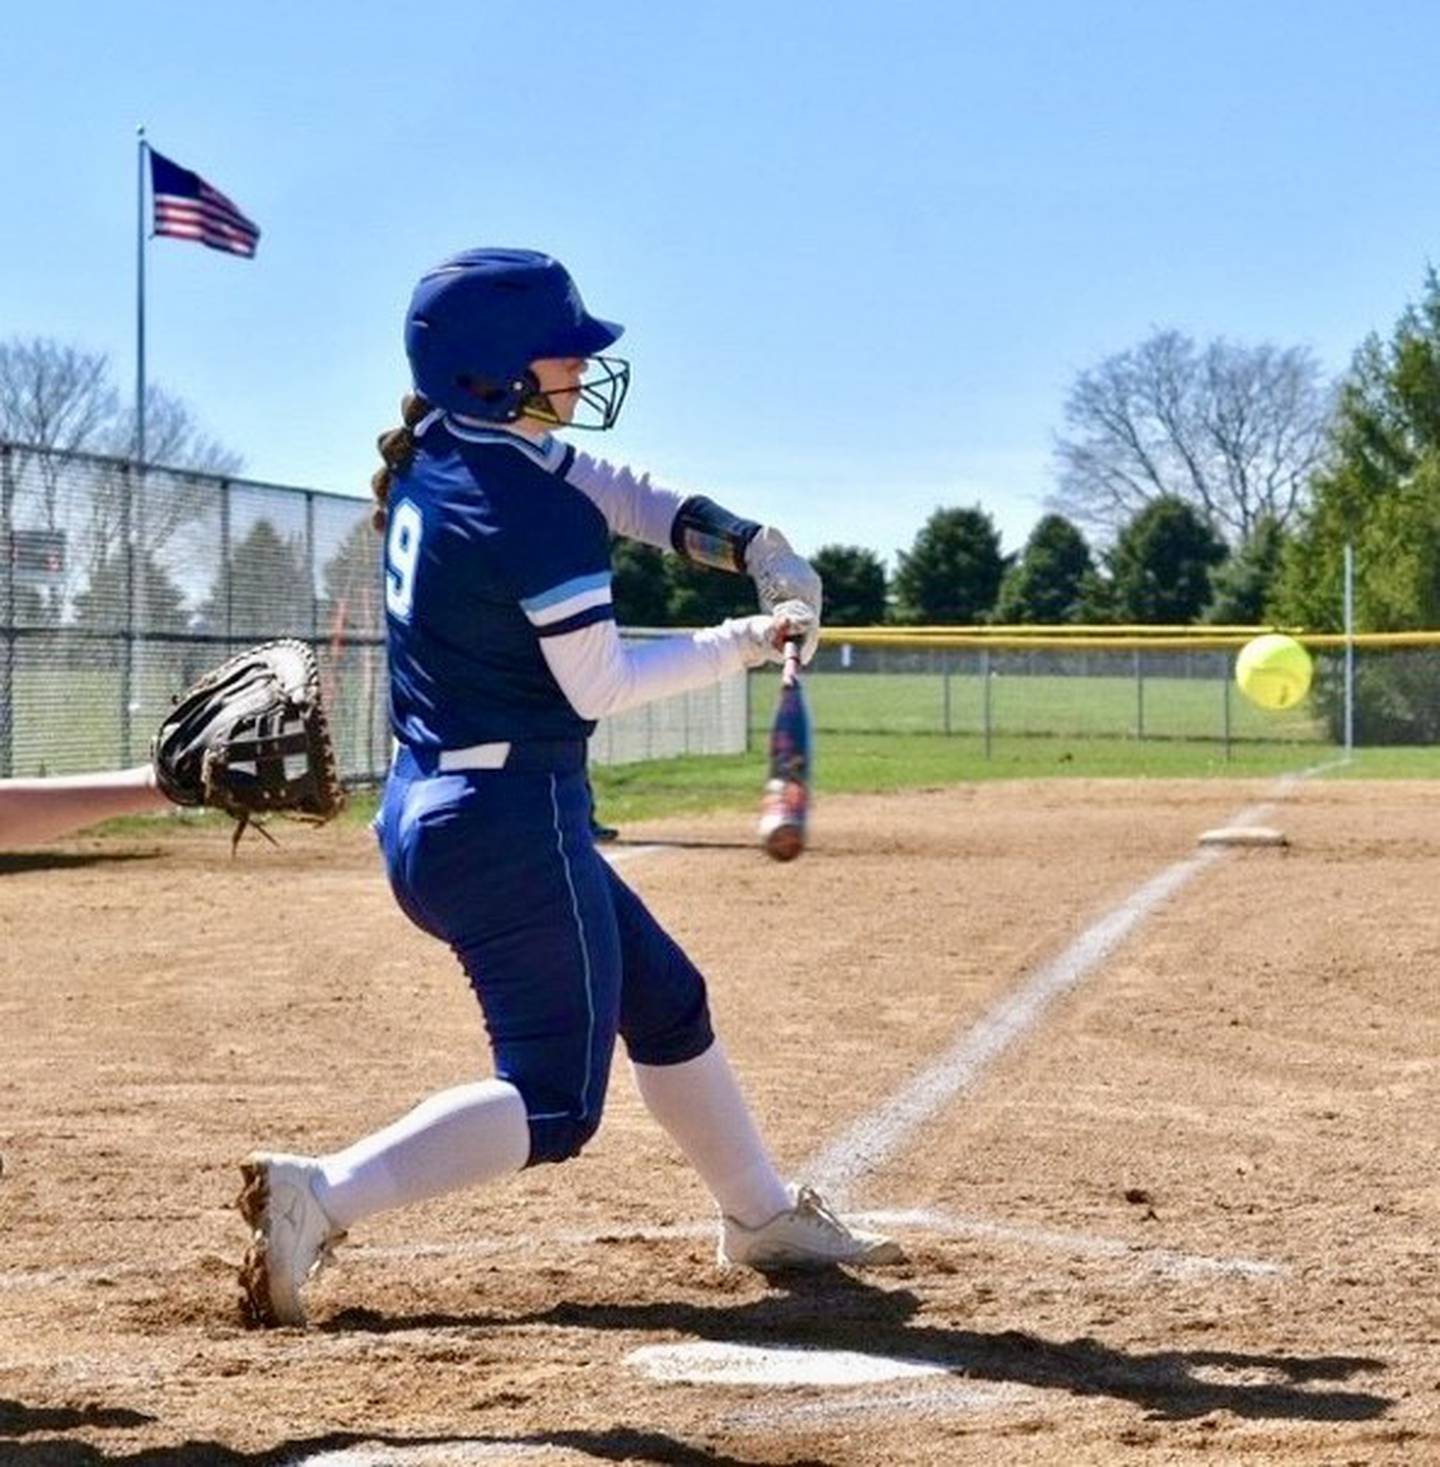 Bureau Valley sophomore catcher connects for a 3-run homer to lead the Storm to a 4-1 win over Kewanee Monday. The Storm took three-time defending state champion Rockridge into extra innings before falling 4-3 on Saturday.